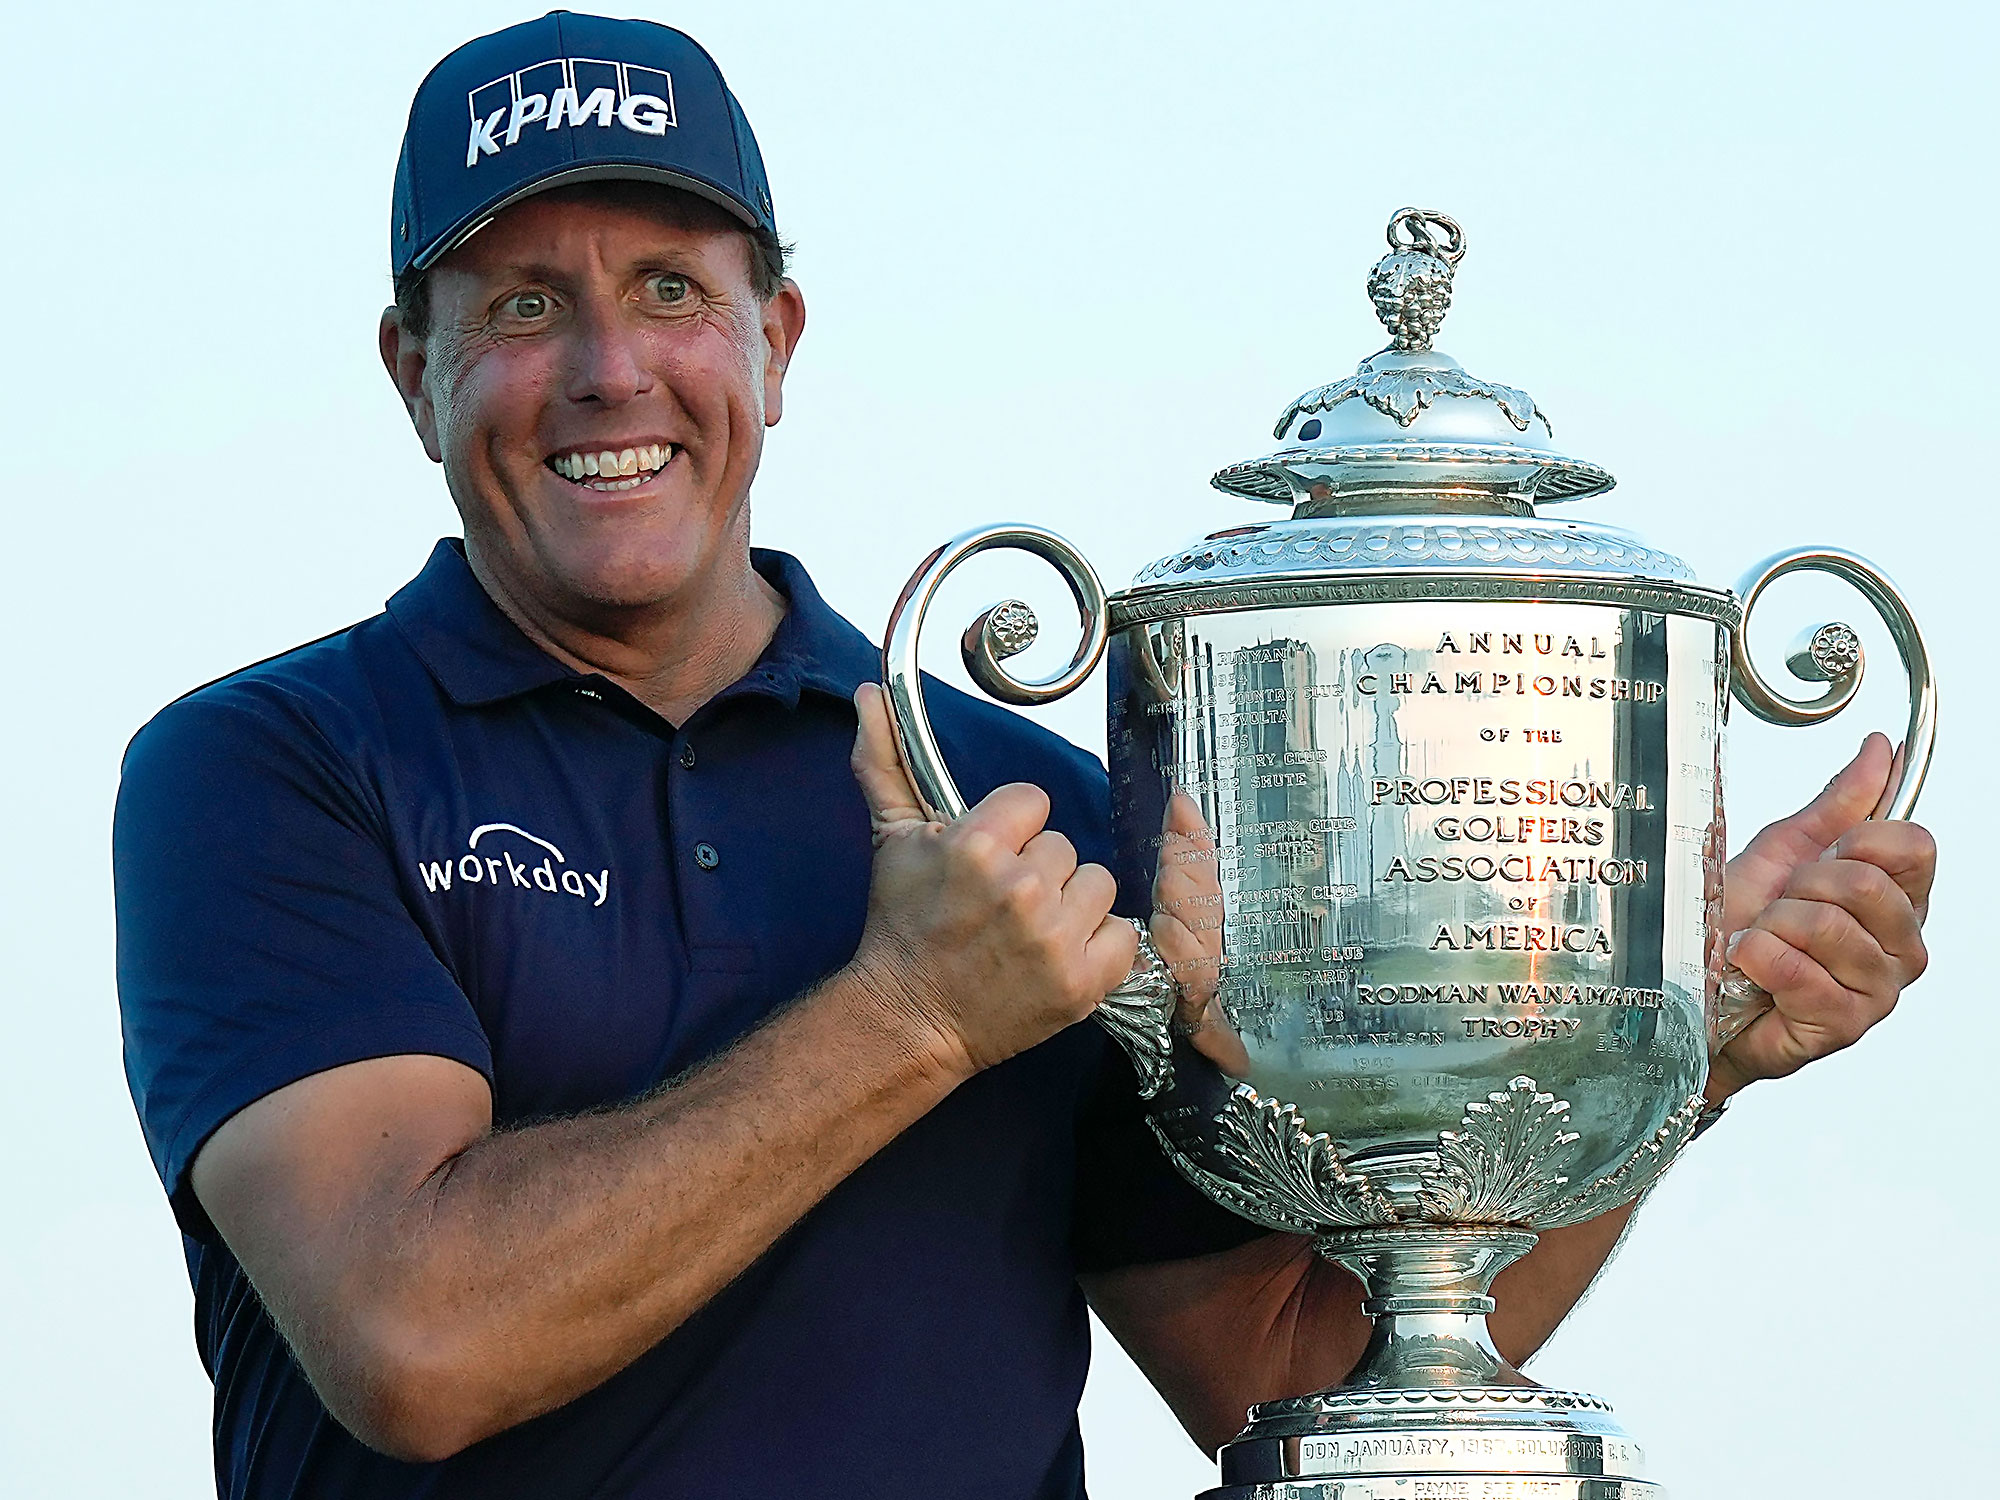 Phil Mickelson Made History: When He Became The Oldest Major Champ at 50